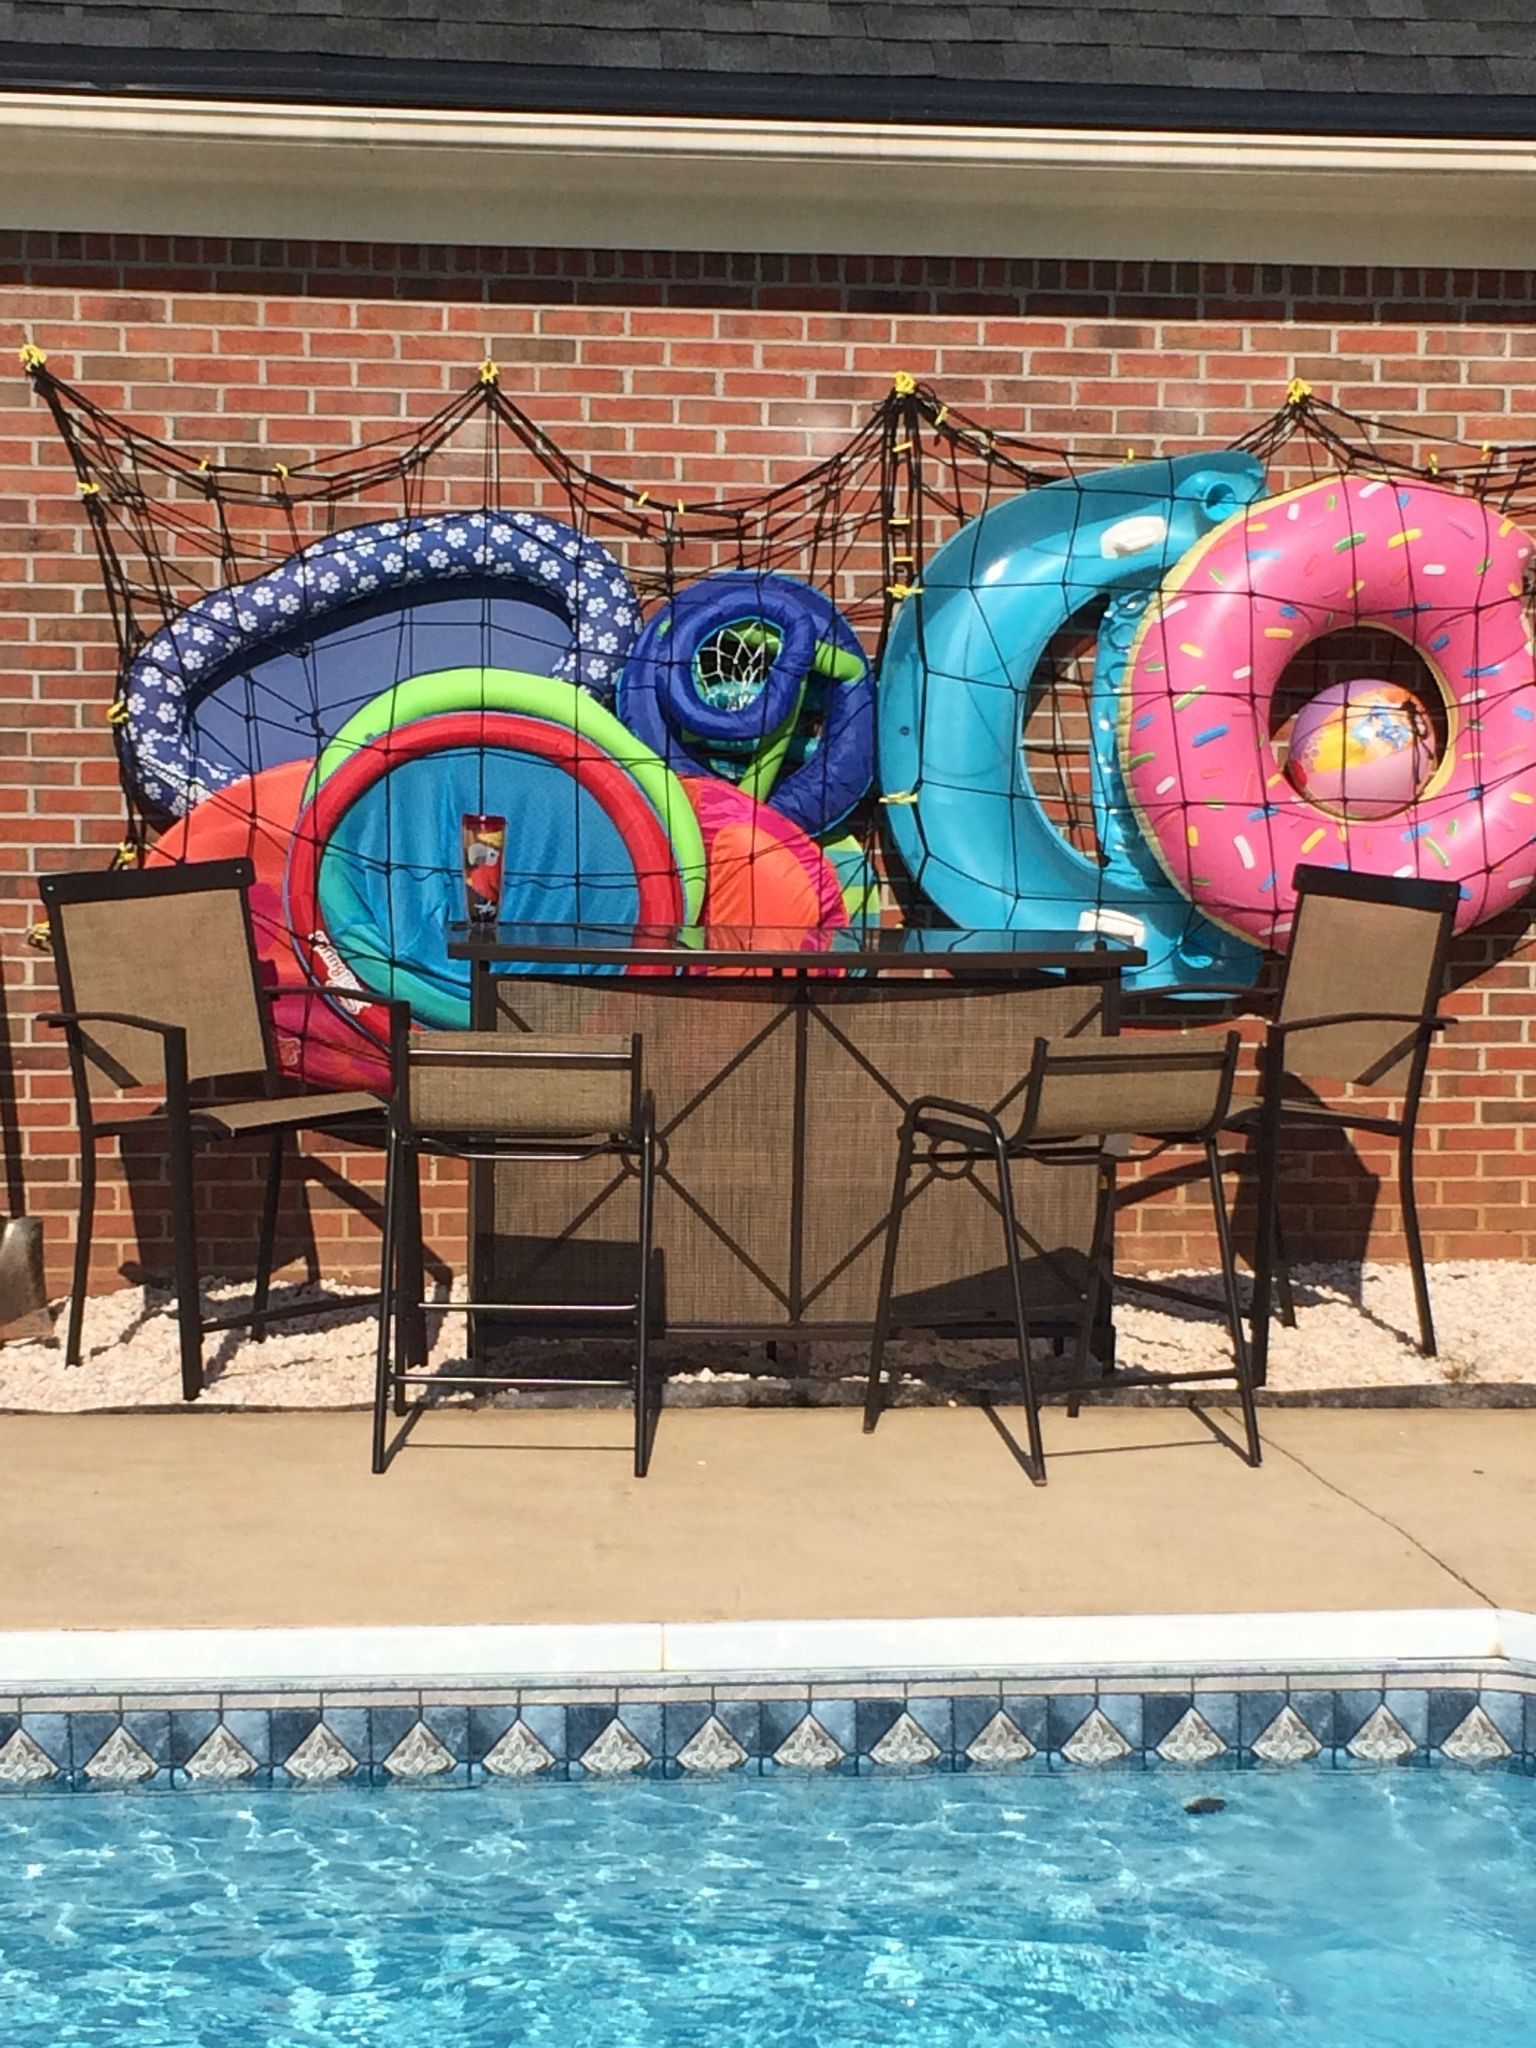 DIY Pool Float Organizer
 Our solution for a backyard bar cargo net swimming pool